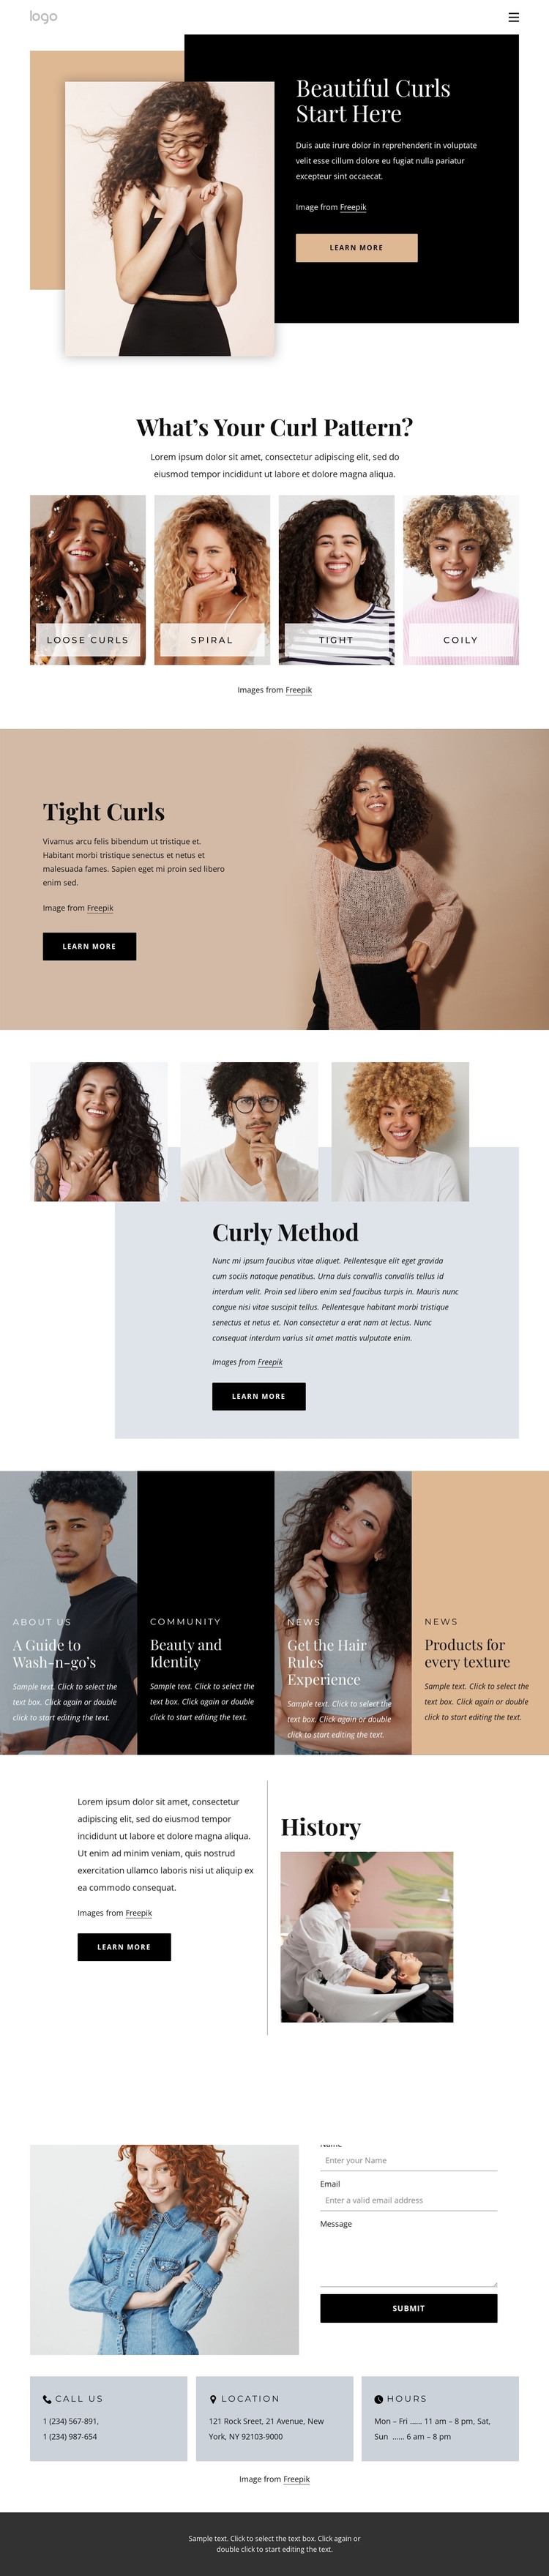 Bring out the best in your curls WordPress Theme